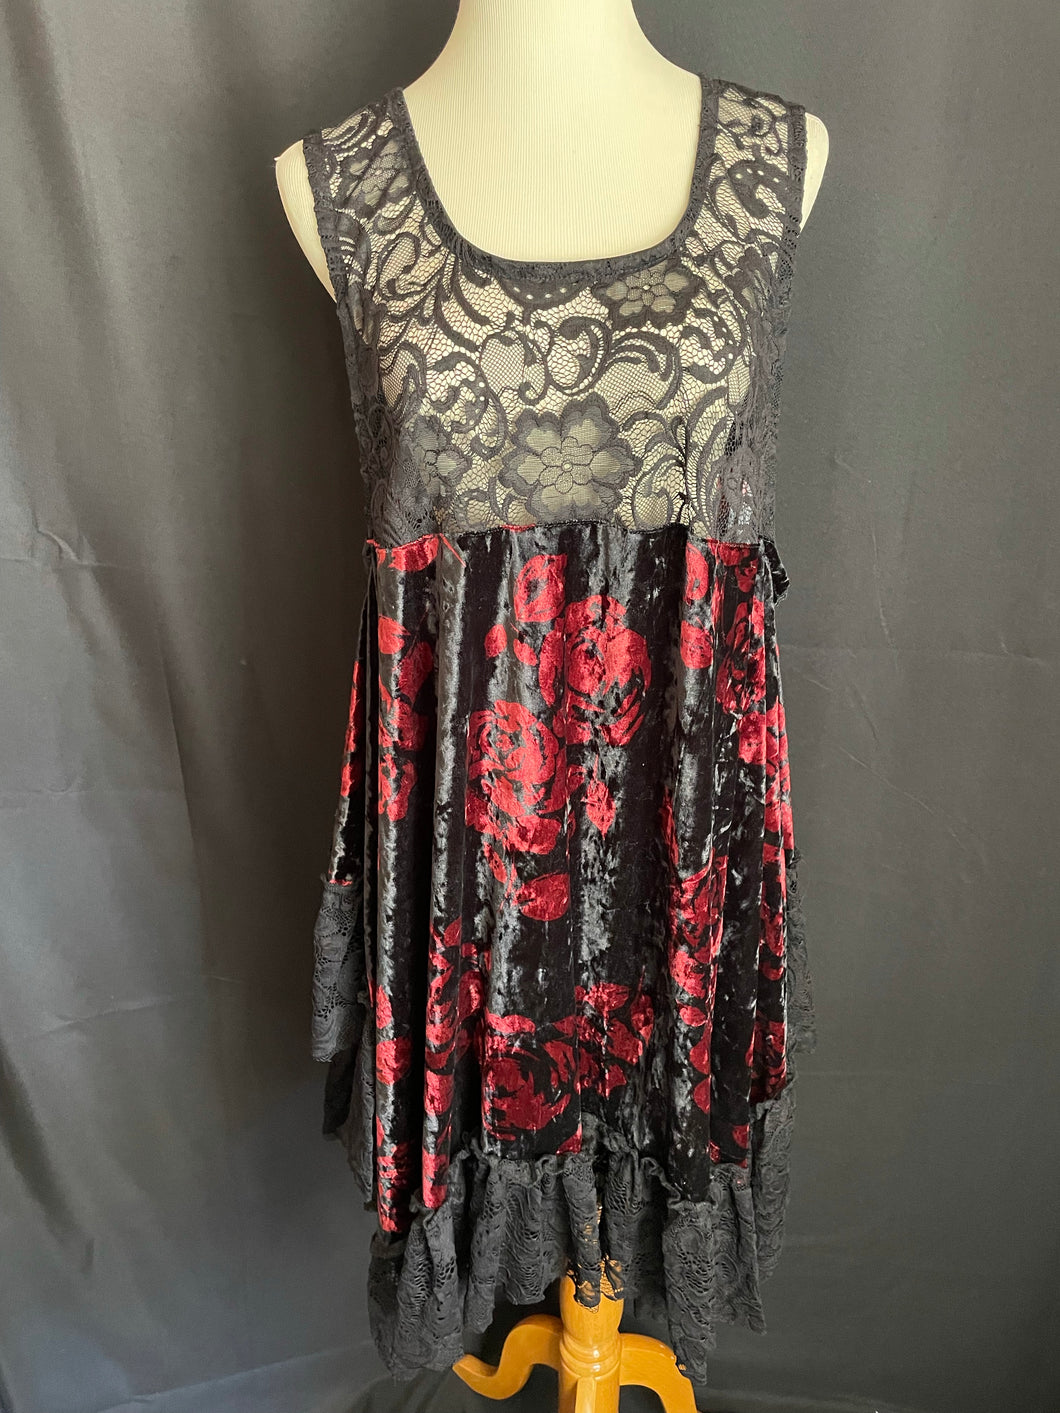 Posh Babydoll Black and Red Lace Dress